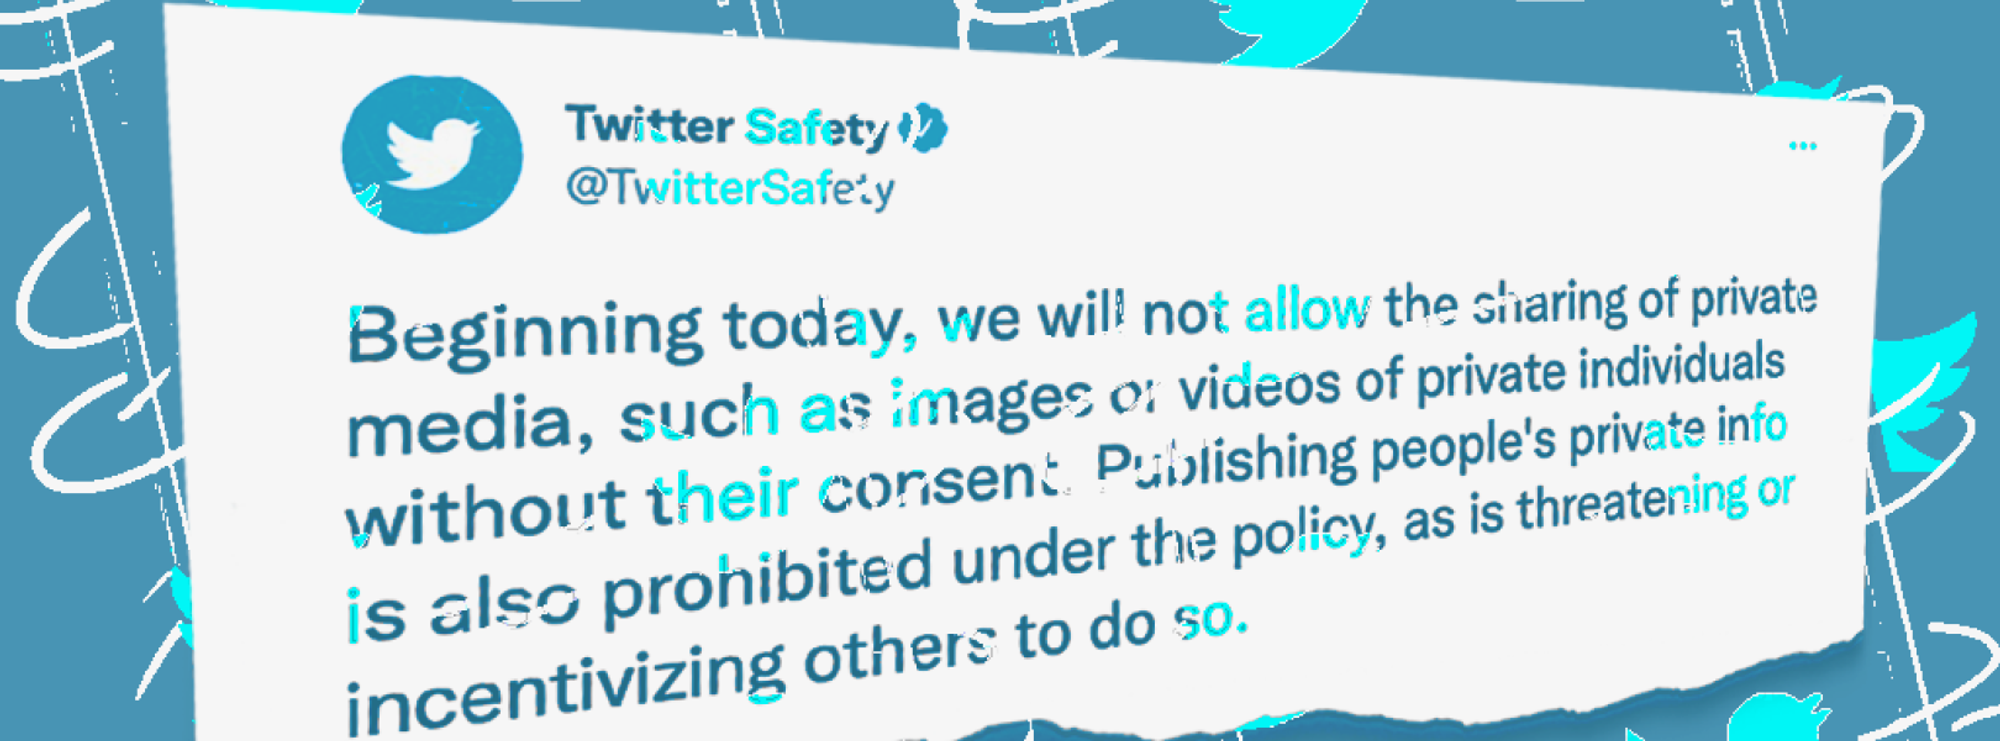 Twitter's new privacy policy is ill-conceived, potentially helping bad actors avoid accountability 